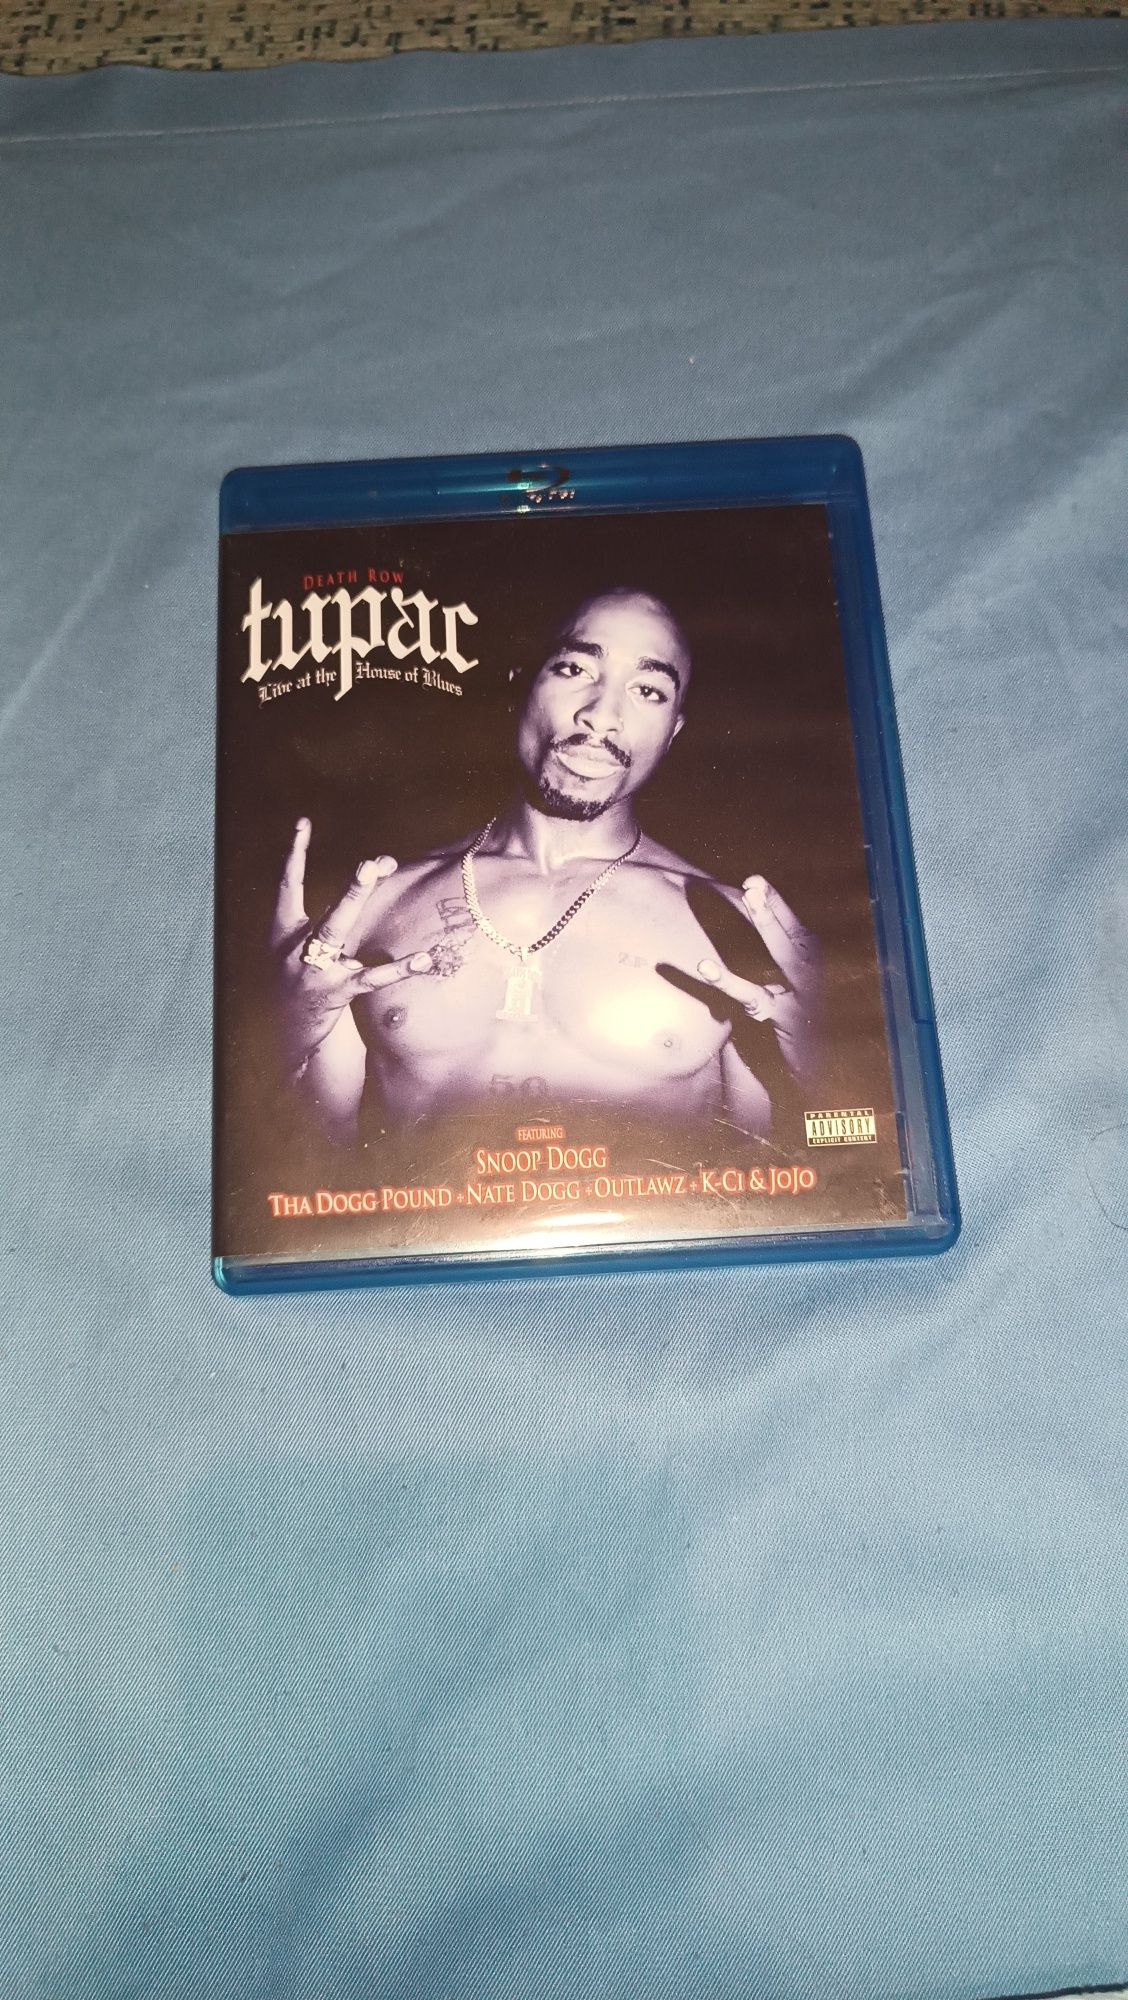 Tupac - Live at the House of Blues BLURAY BLU-RAY